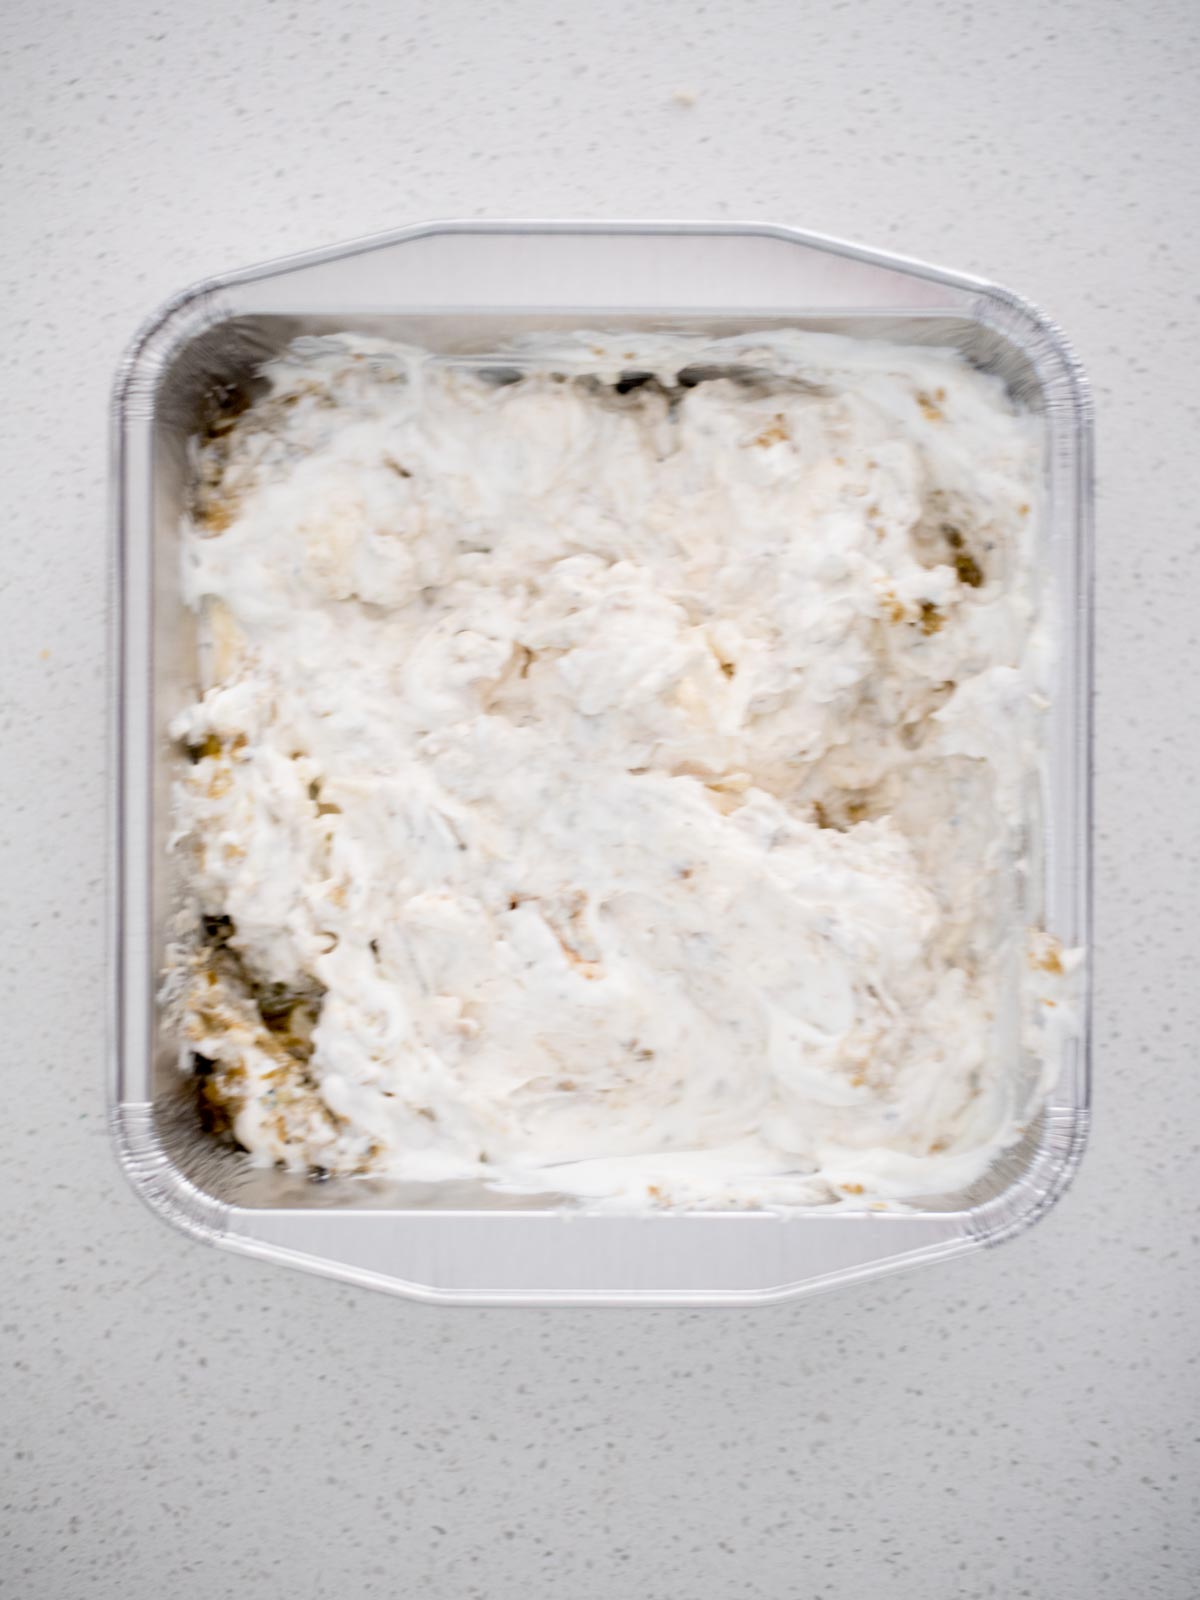 queso blanco ingredients mixed together in an aluminum pan